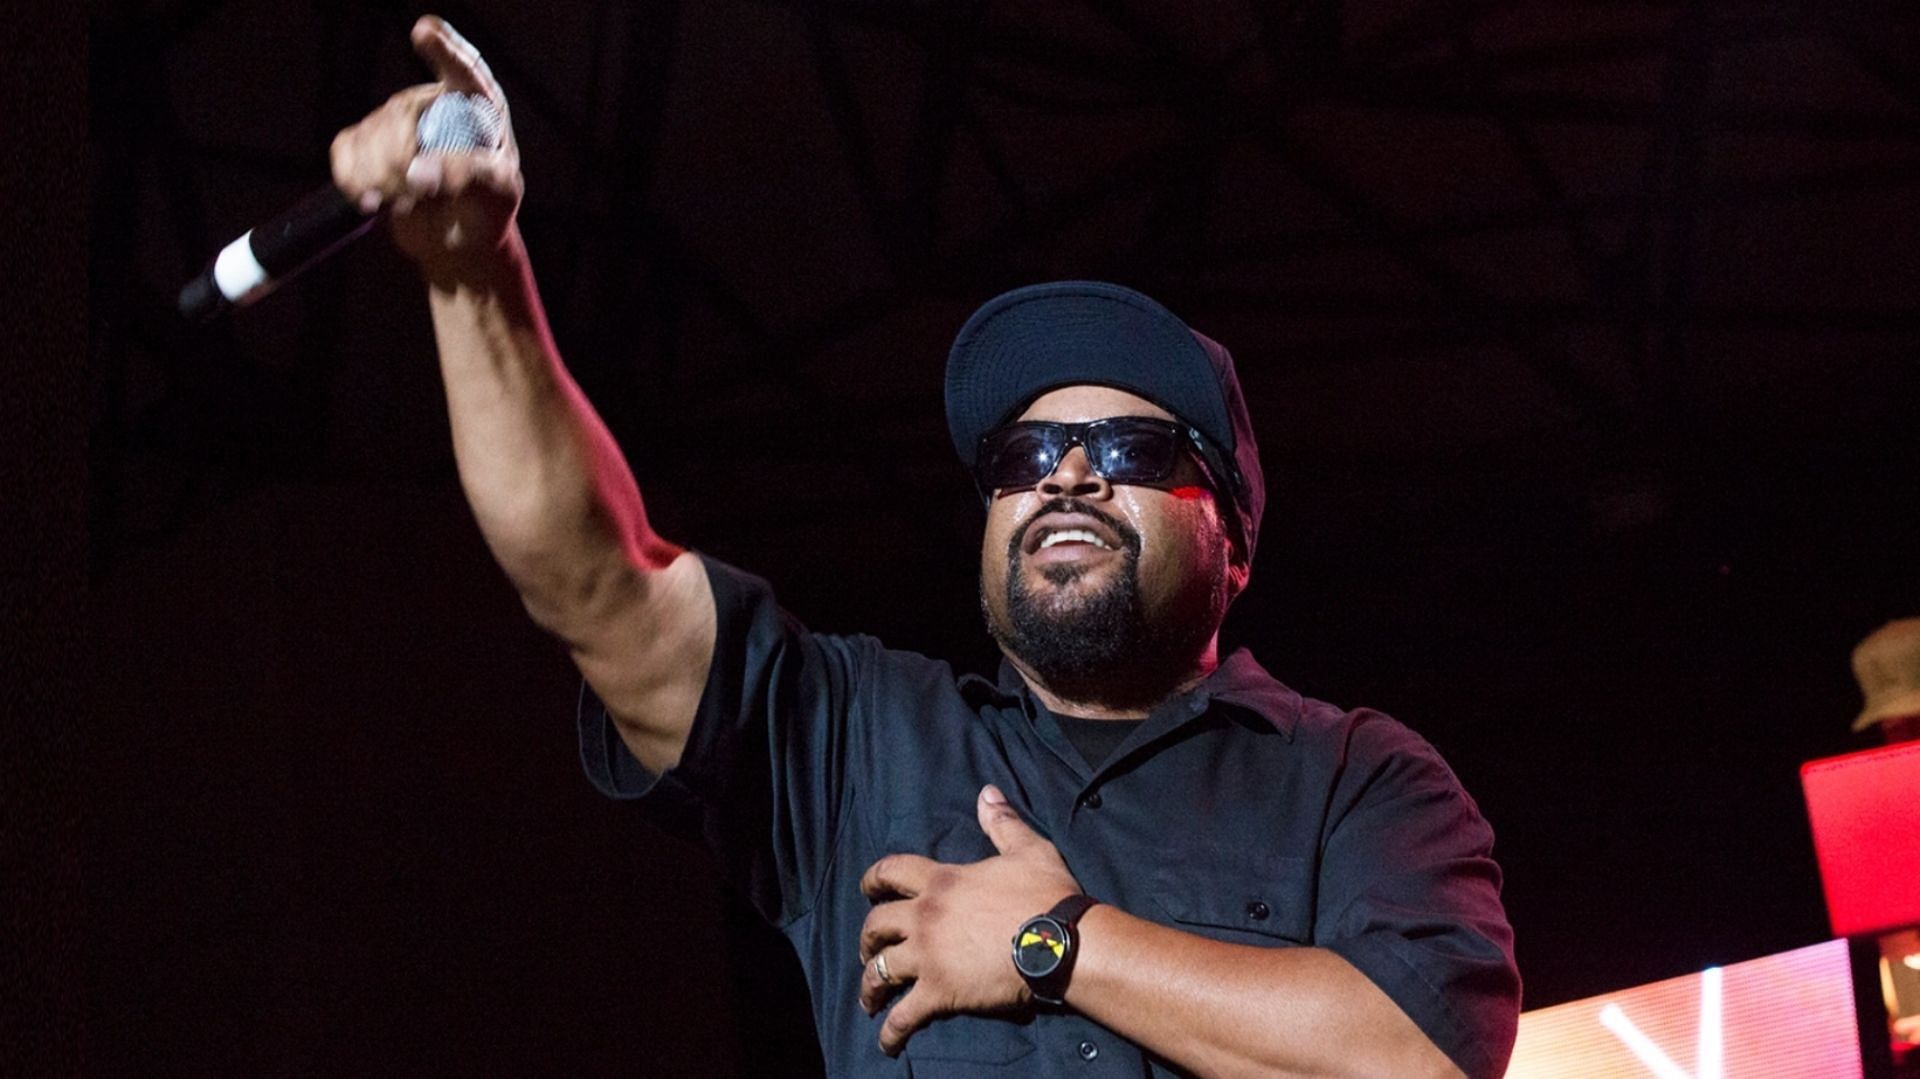 Ice Cube has been announced as the headlner for West Fest 2022. (Image via Getty)